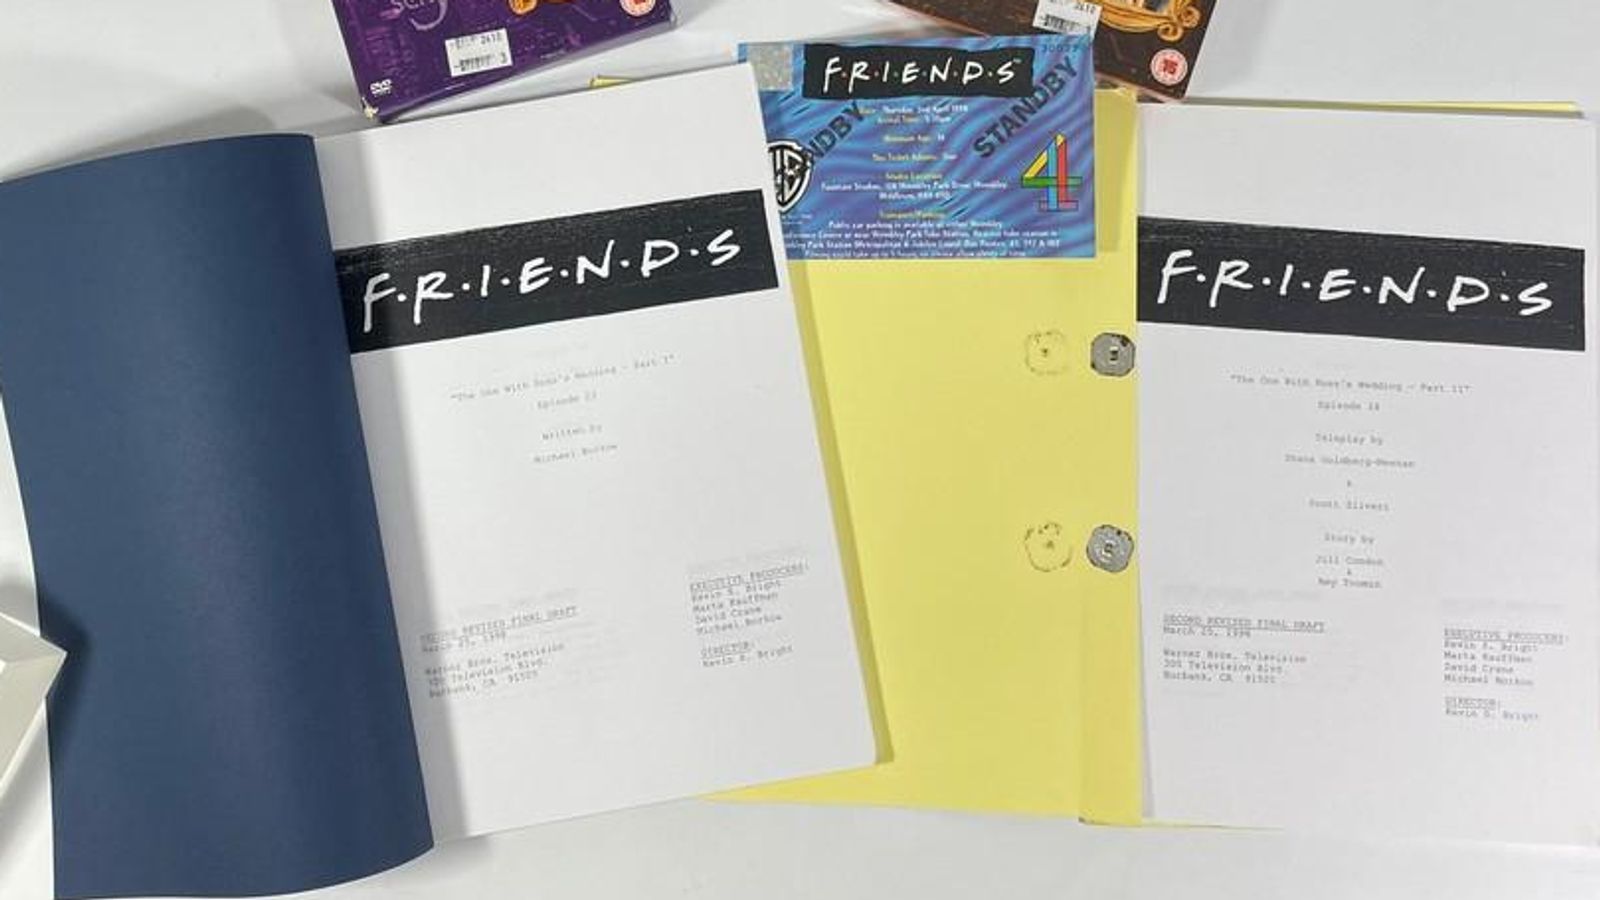 Friends scripts of iconic Ross wedding episodes sell for £22,000 after being found in bin 25 years ago